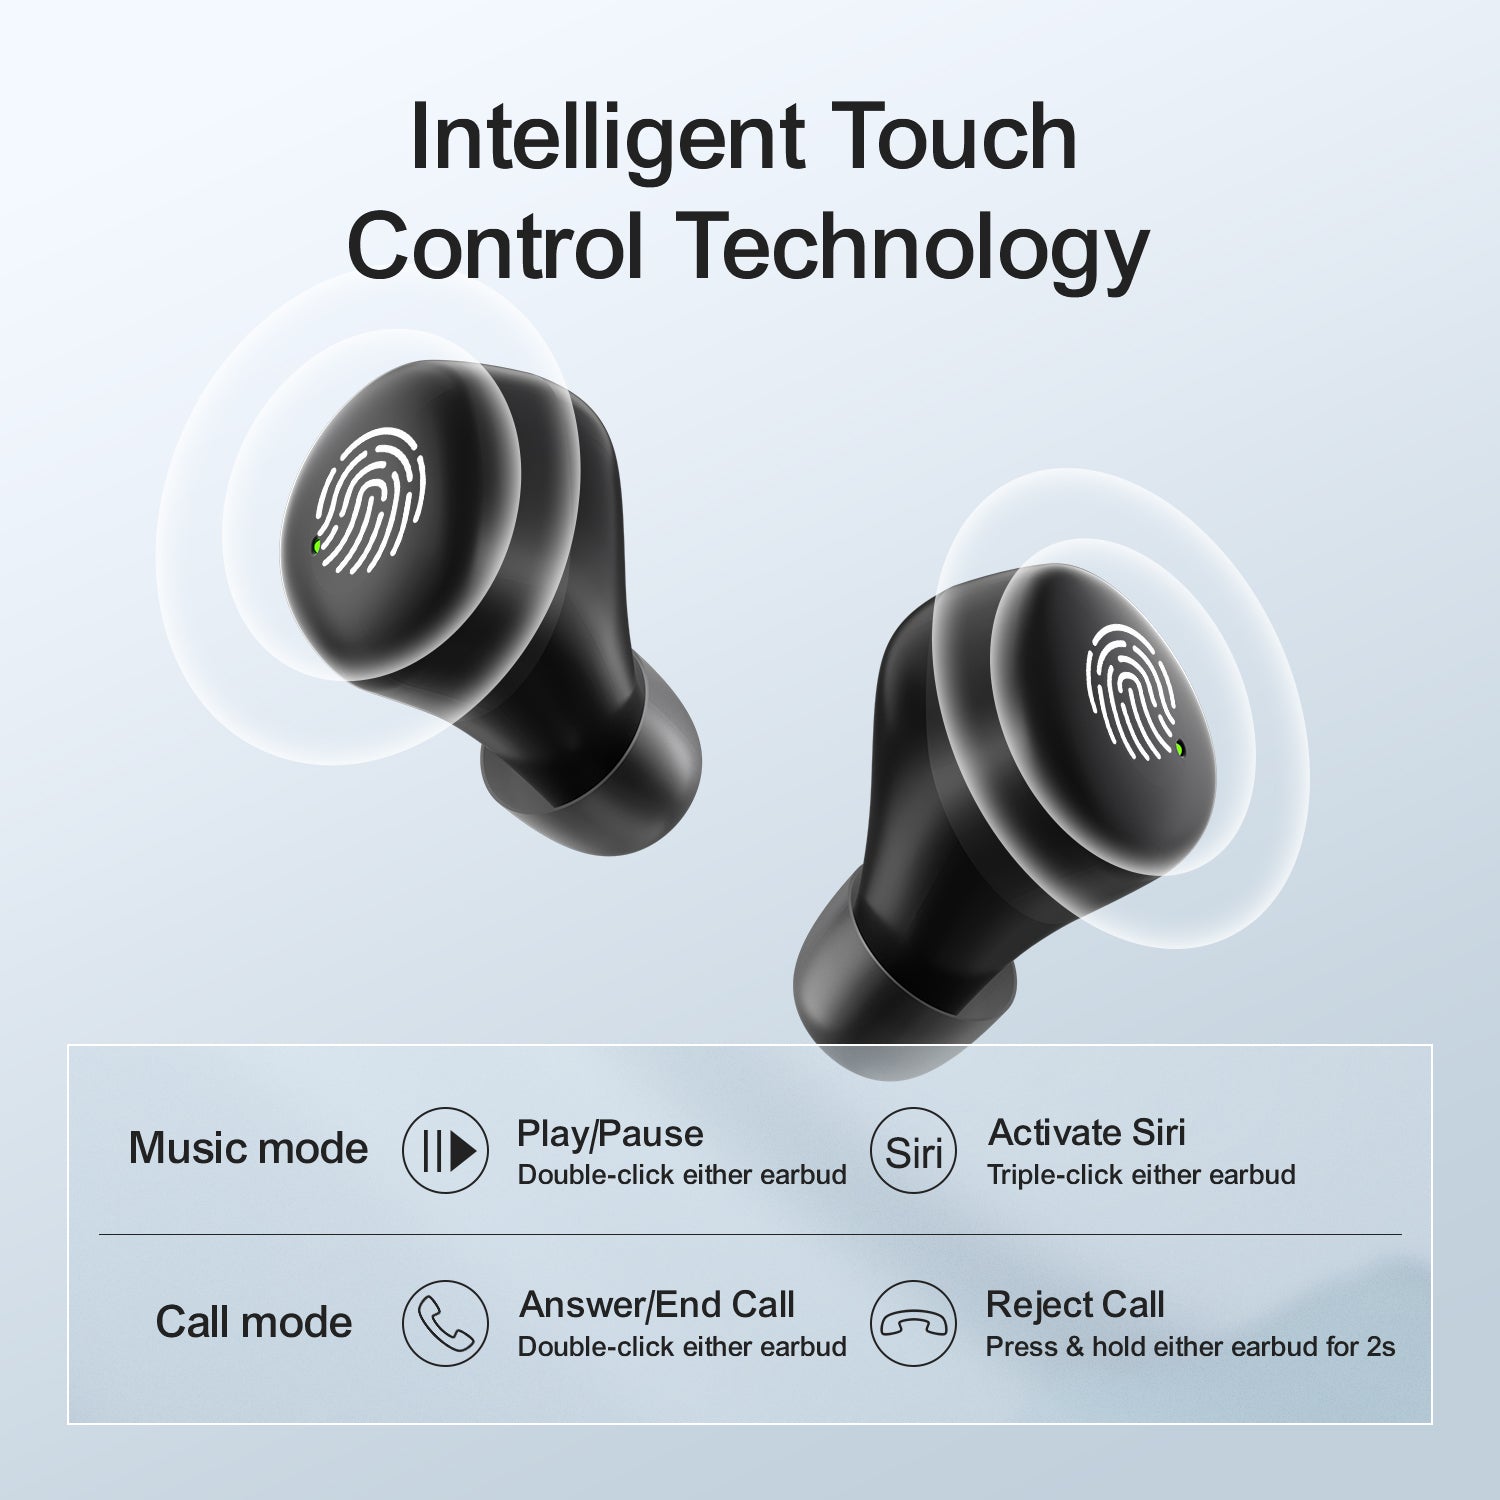 Intelligent Touch Control Technology